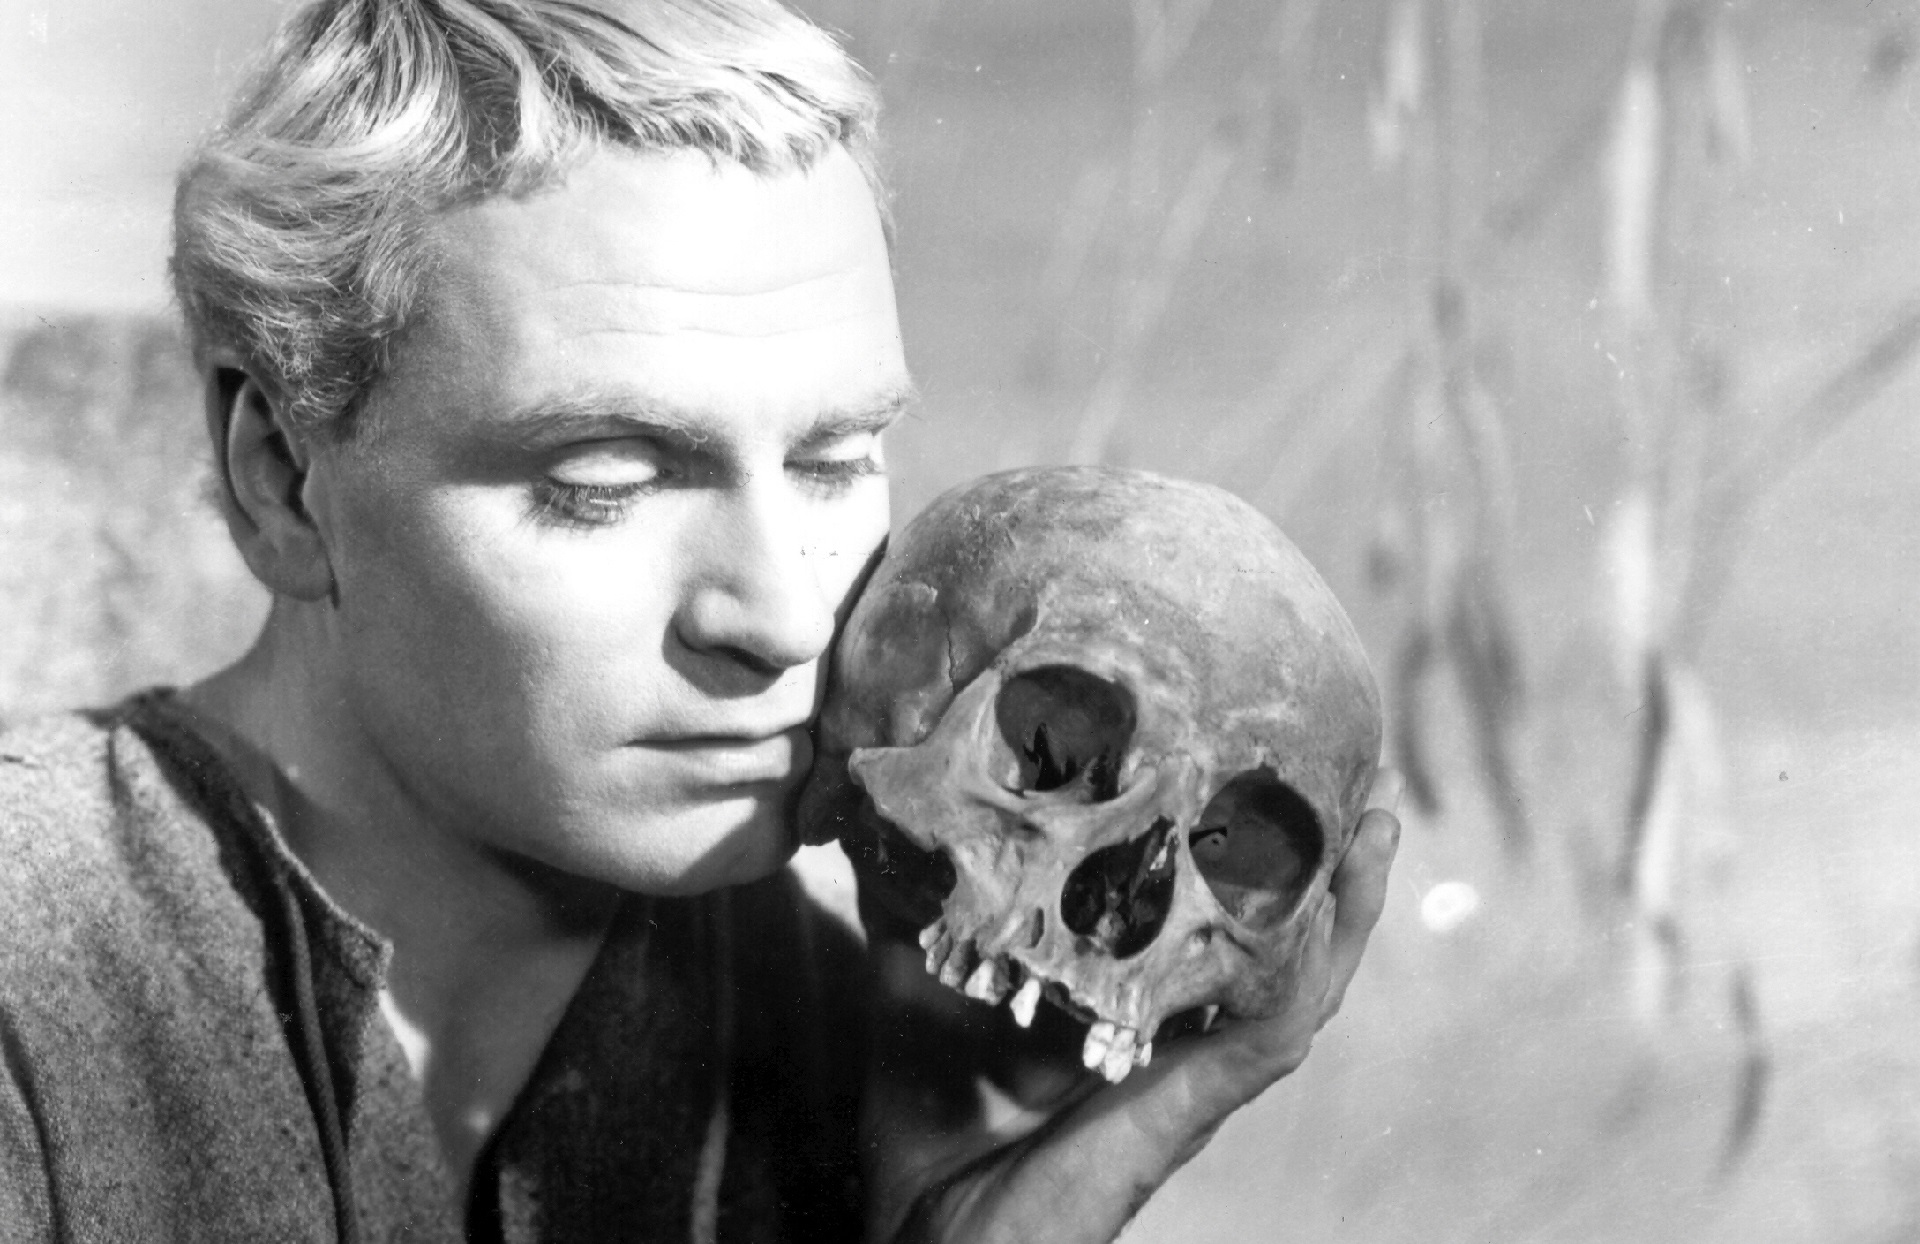 hamlet skull to be or not to be